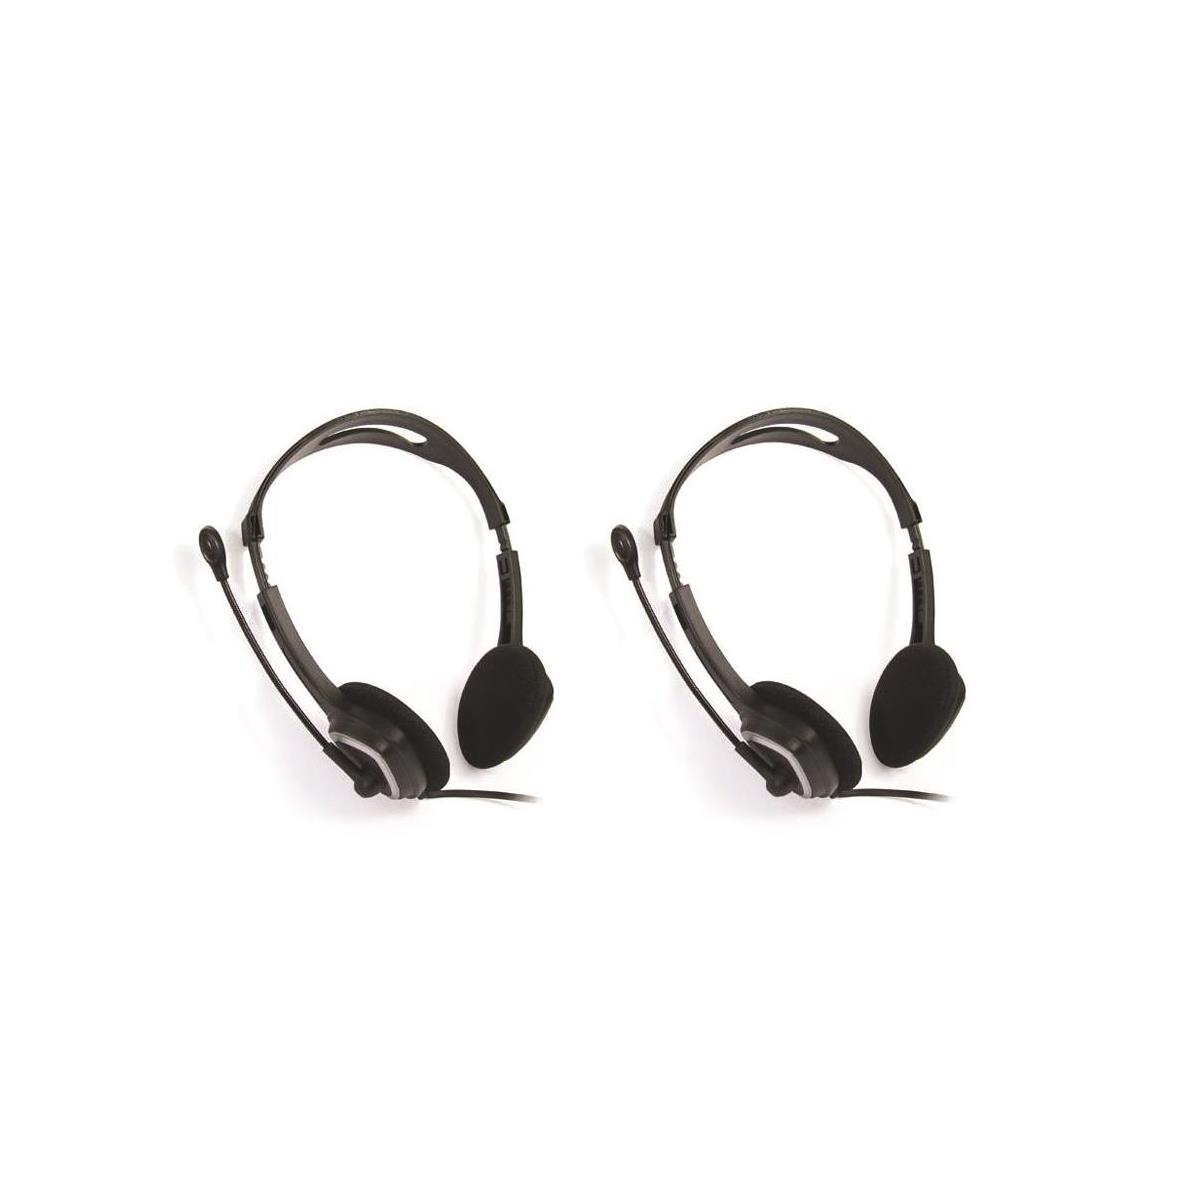 Photos - Mobile Phone Headset iMicro IM320 USB Headset with Microphone, 2-Pack SP-IM320 2